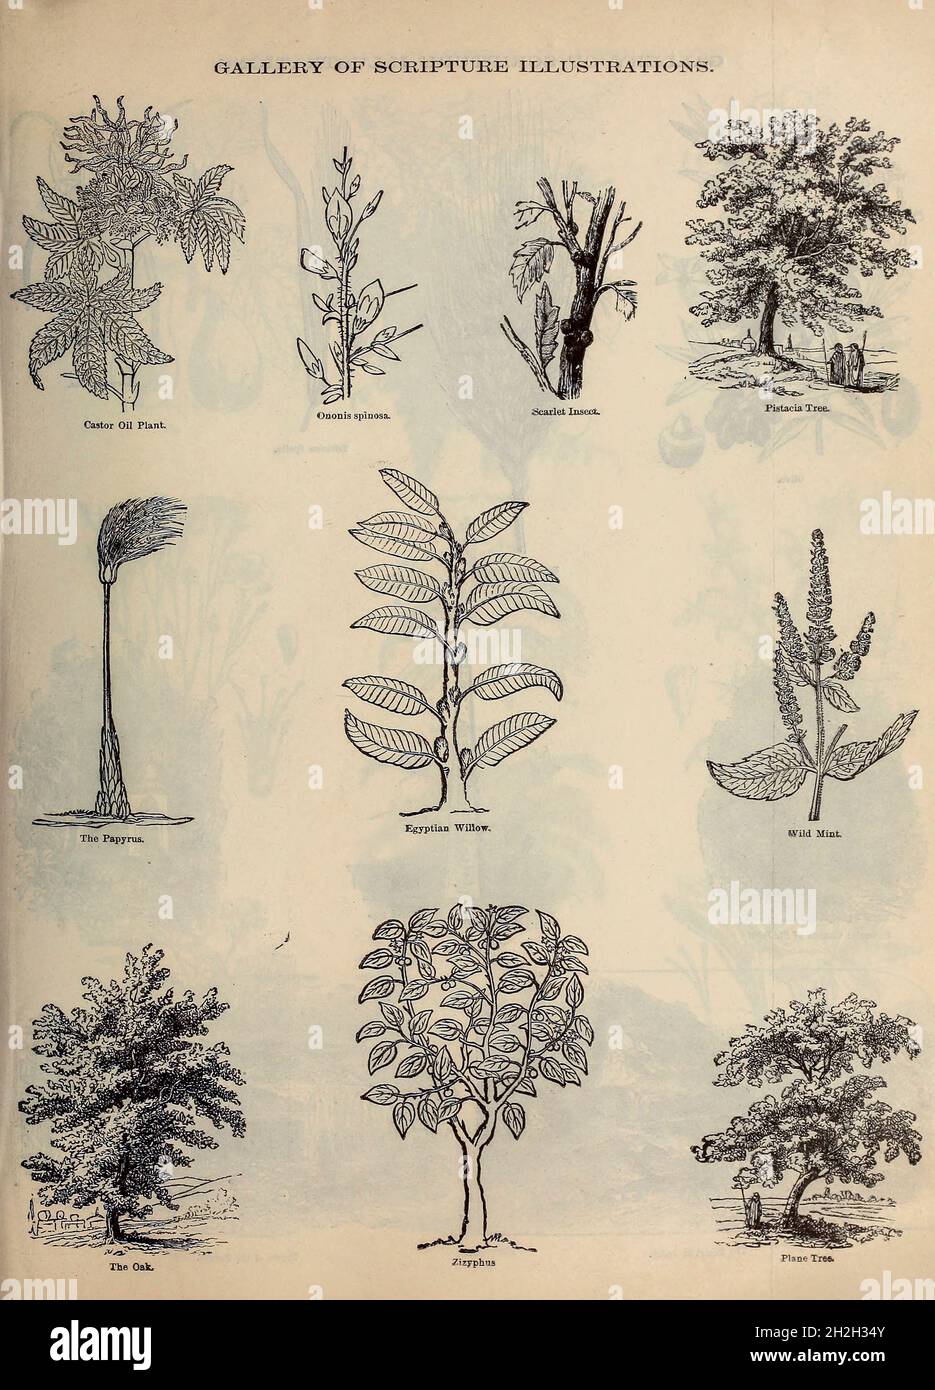 Gallery of Scripture Illustrations of plants and crops from ' The Doré family Bible ' containing the Old and New Testaments, The Apocrypha Embellished with Fine Full-Page Engravings, Illustrations and the Dore Bible Gallery. Published in Philadelphia by William T. Amies in 1883 Stock Photo